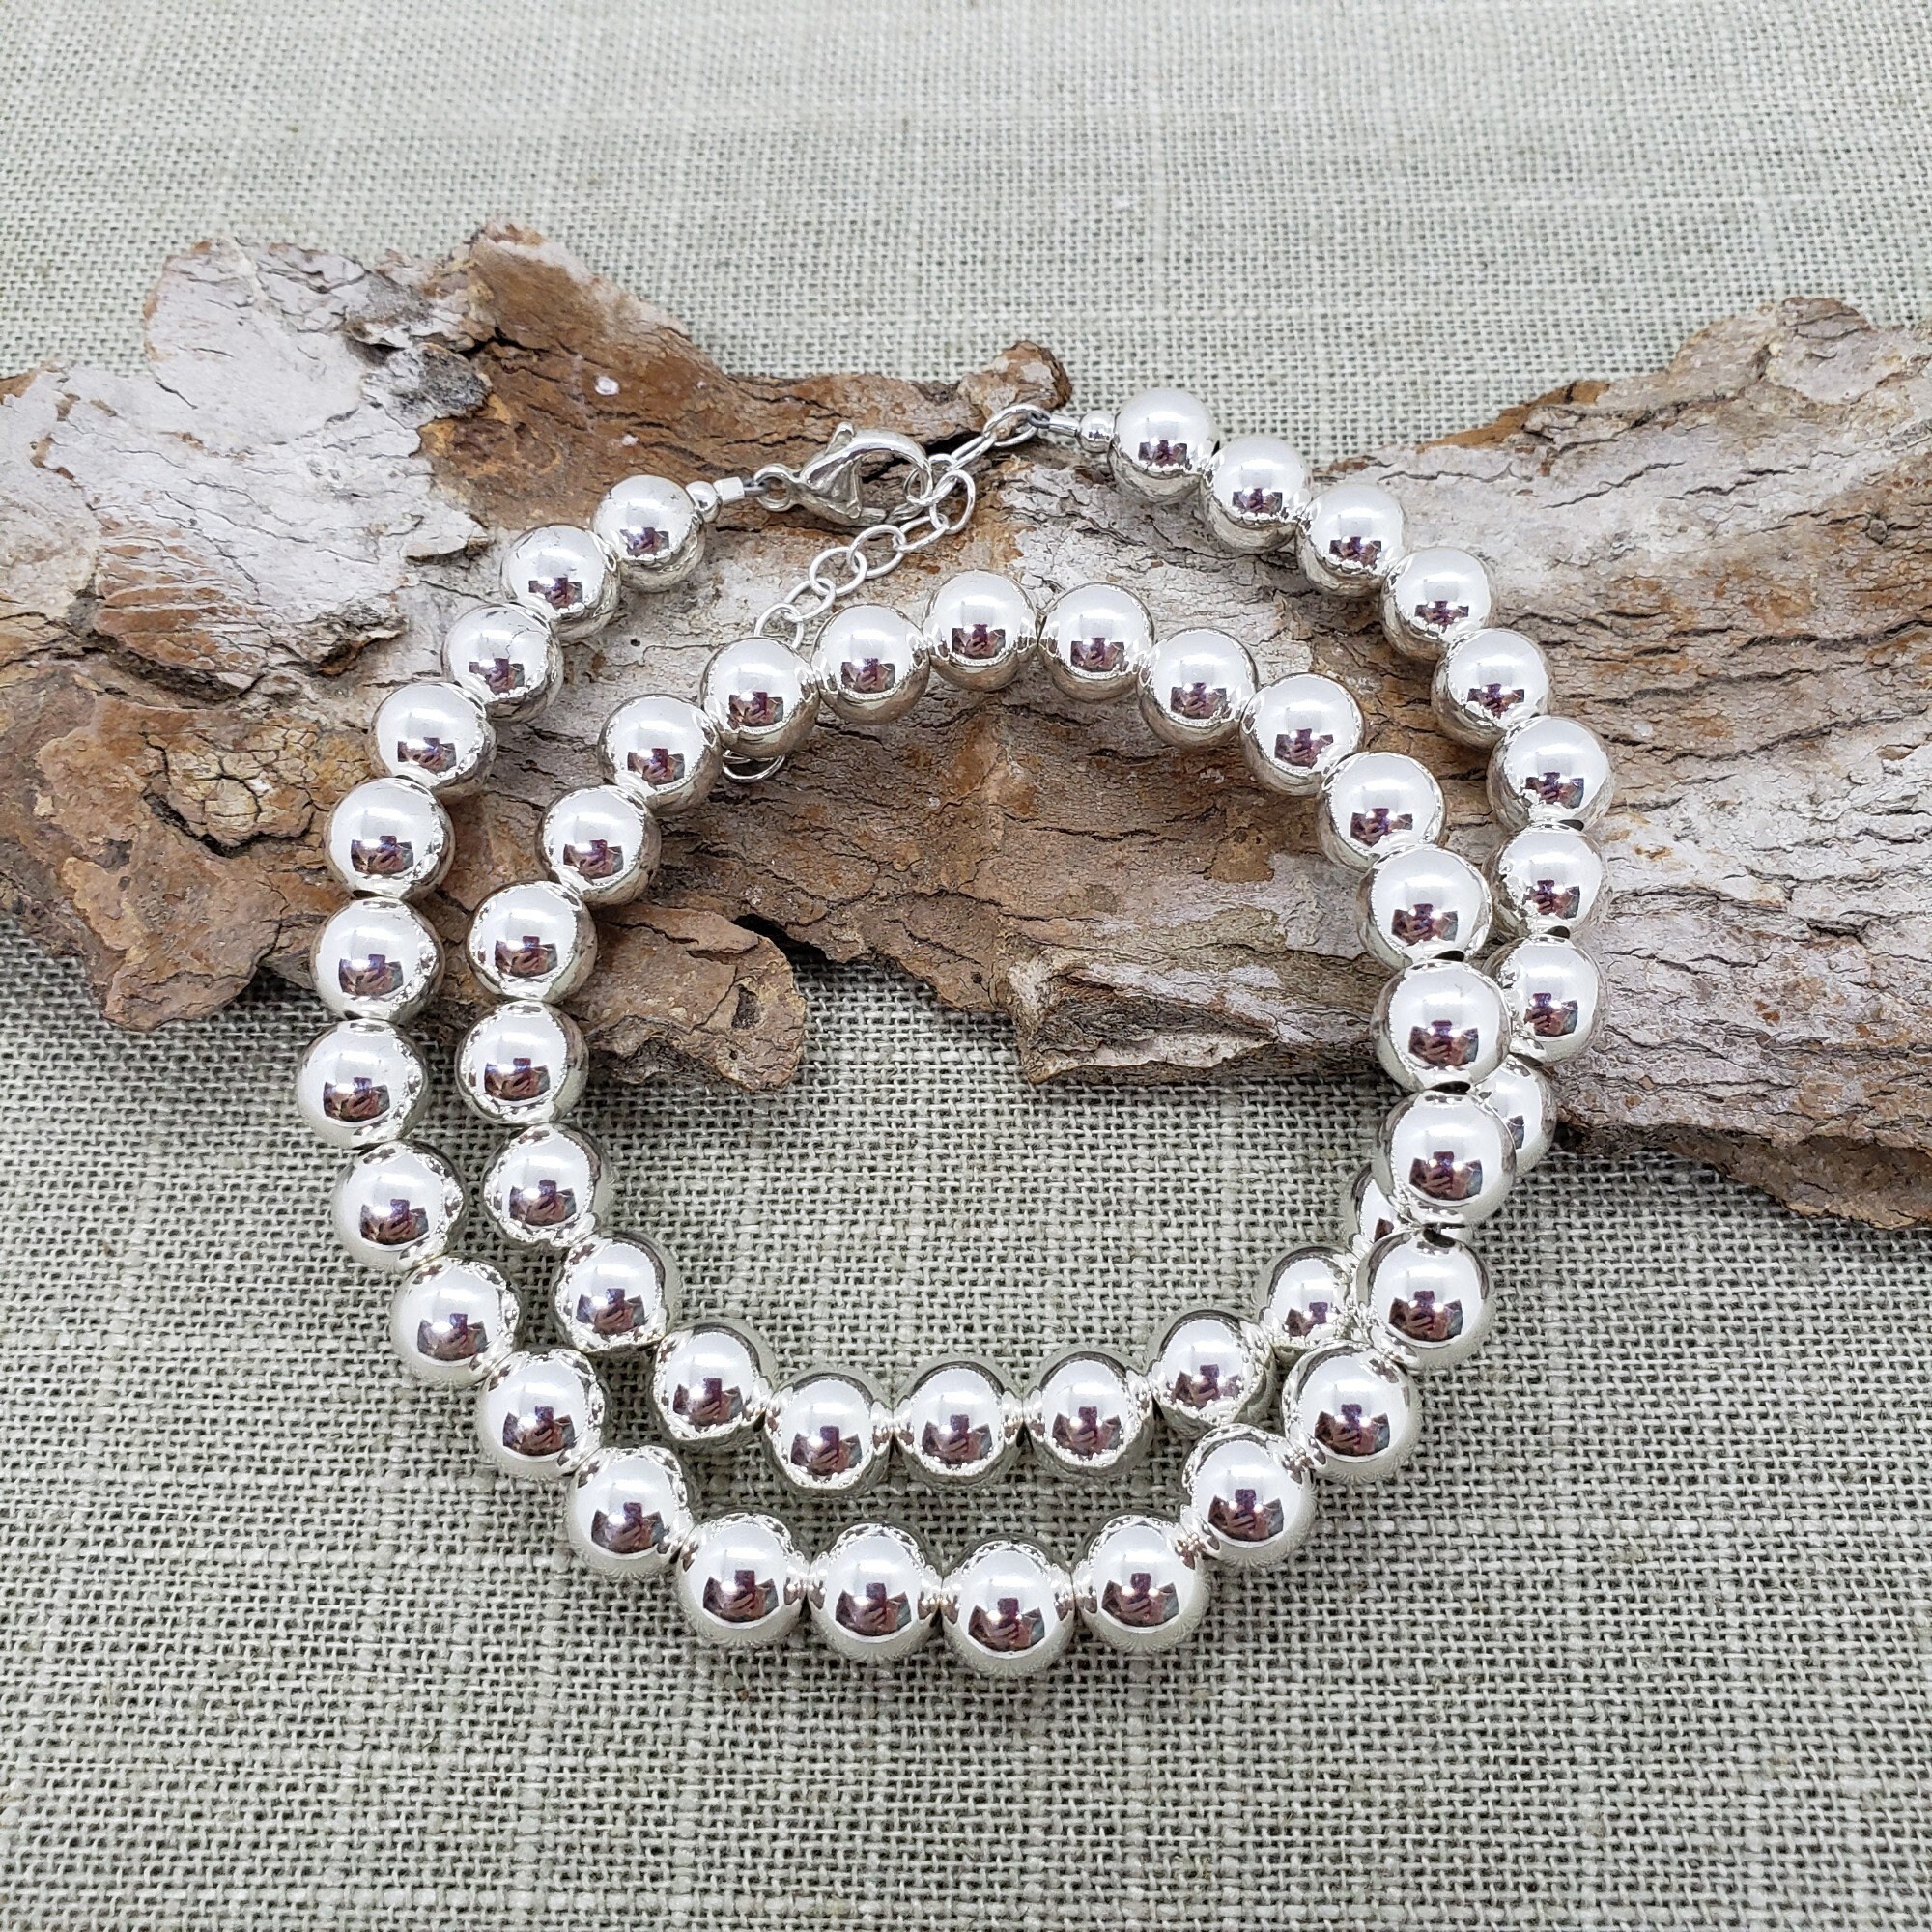 8mm Sterling Silver Bead Necklace 8mm Silver Bead Necklace - Etsy